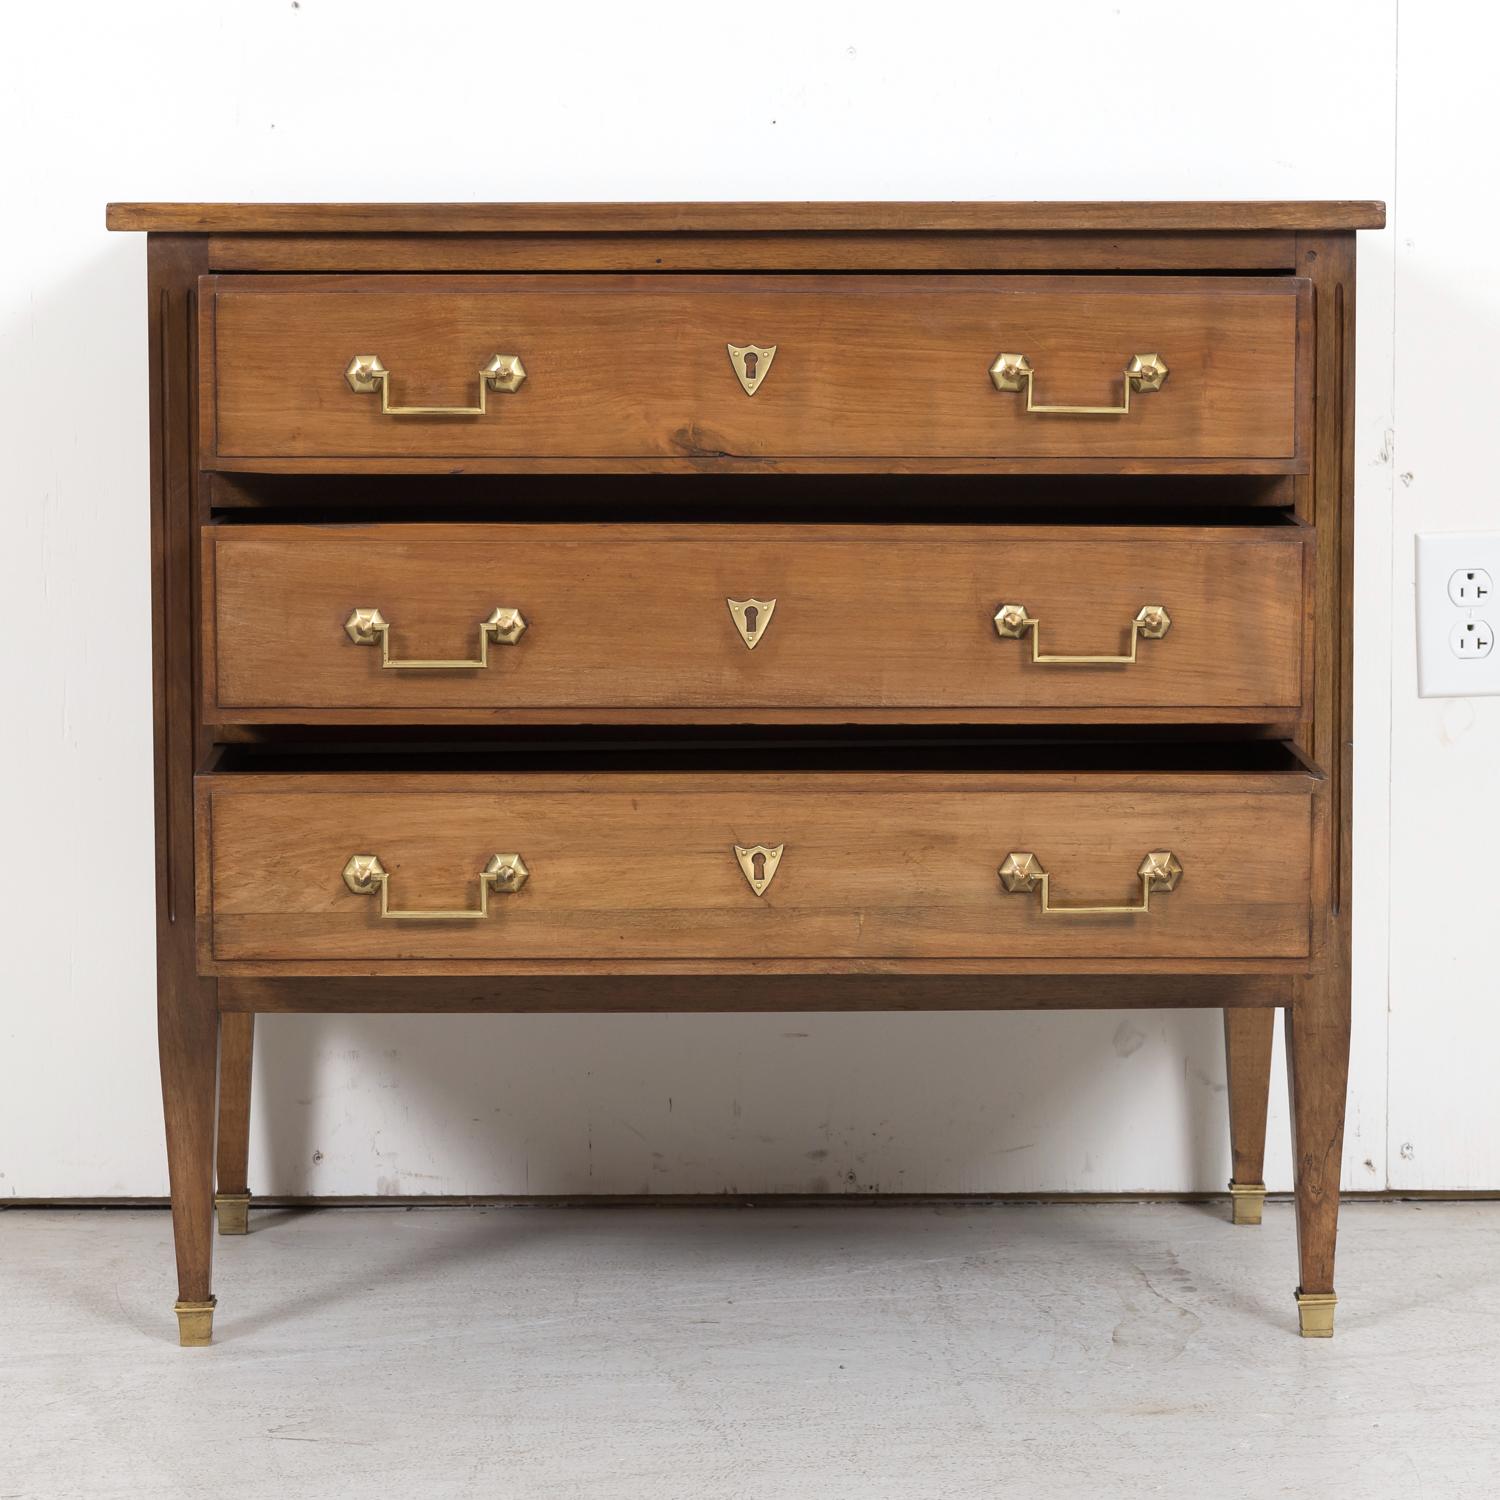 19th Century Louis XVI Style Petite Walnut Commode with Marquetry Band on Top 1